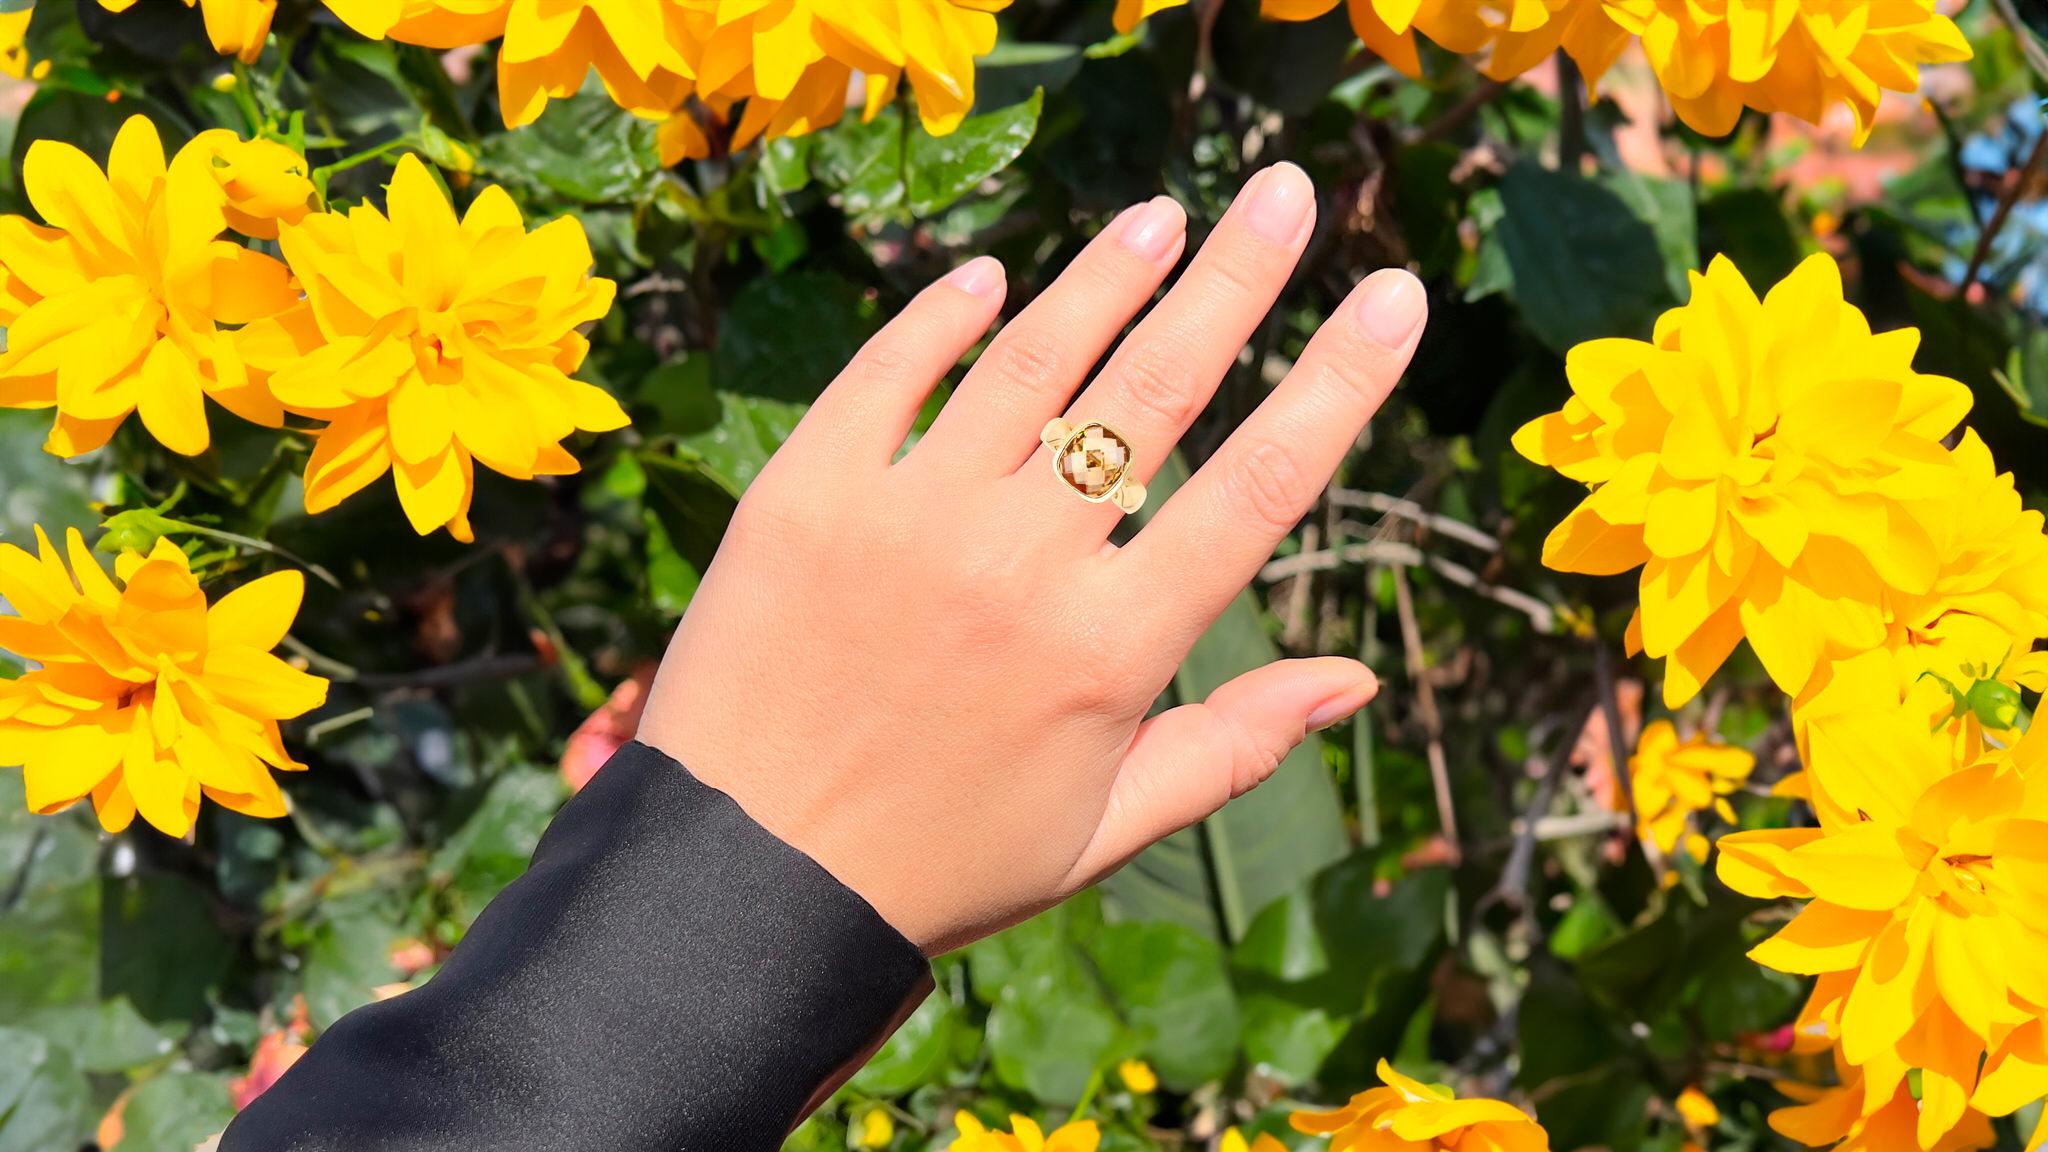 It comes with the Gemological Appraisal by GIA GG/AJP
Citrine = 3.85 Carats
Origin: Natural, Treatment: Heated
Metal: 14K Yellow Gold Plated Sterling Silver
Ring Size: 7* US
*It can be resized complimentary